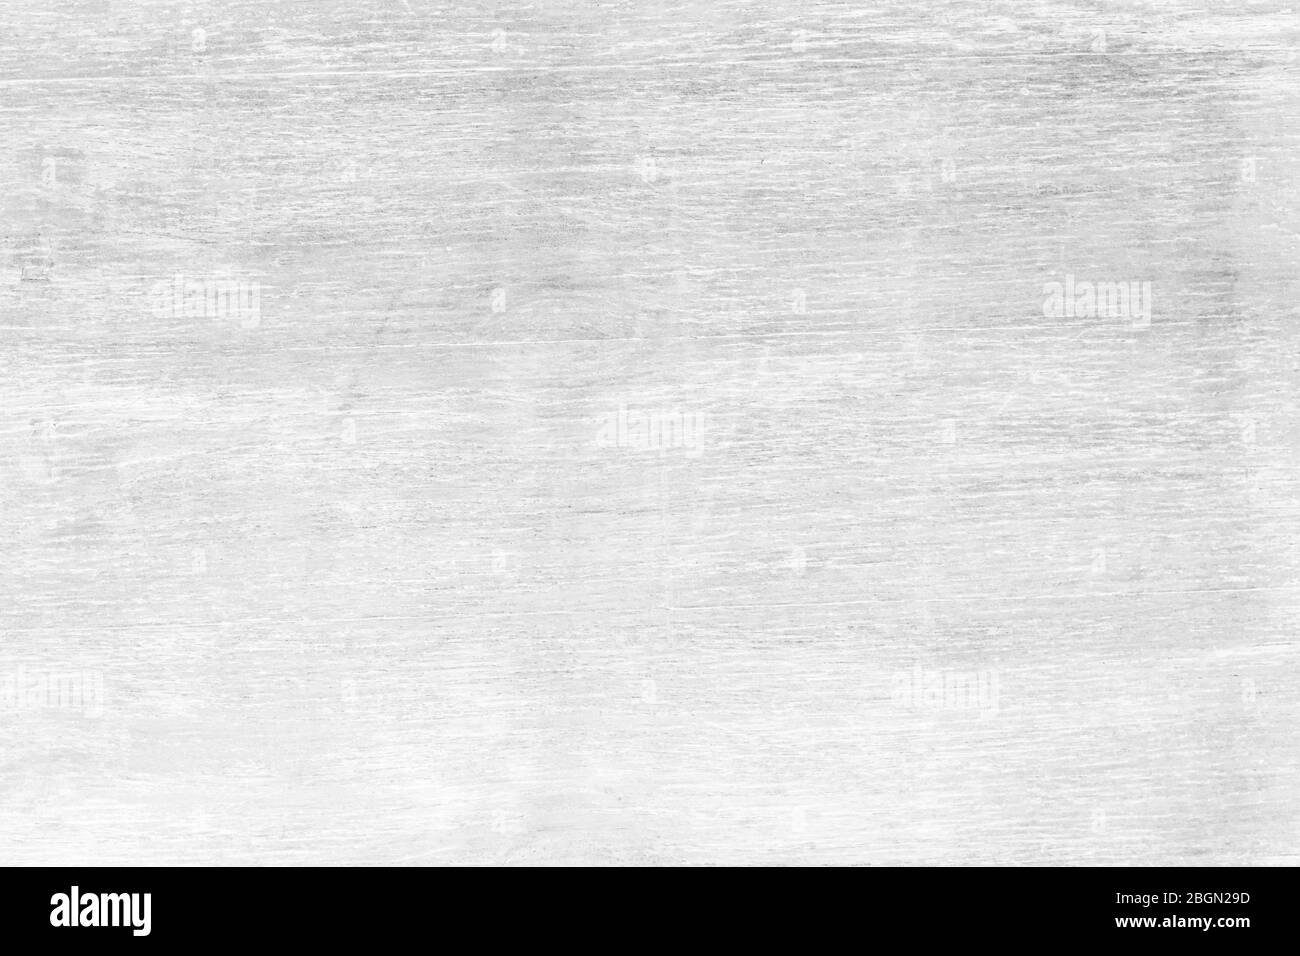 White grain luxury home table wood on top above view concept clean tabletop formica desk, counter background texture, rustic plain siding marble bacgr Stock Photo